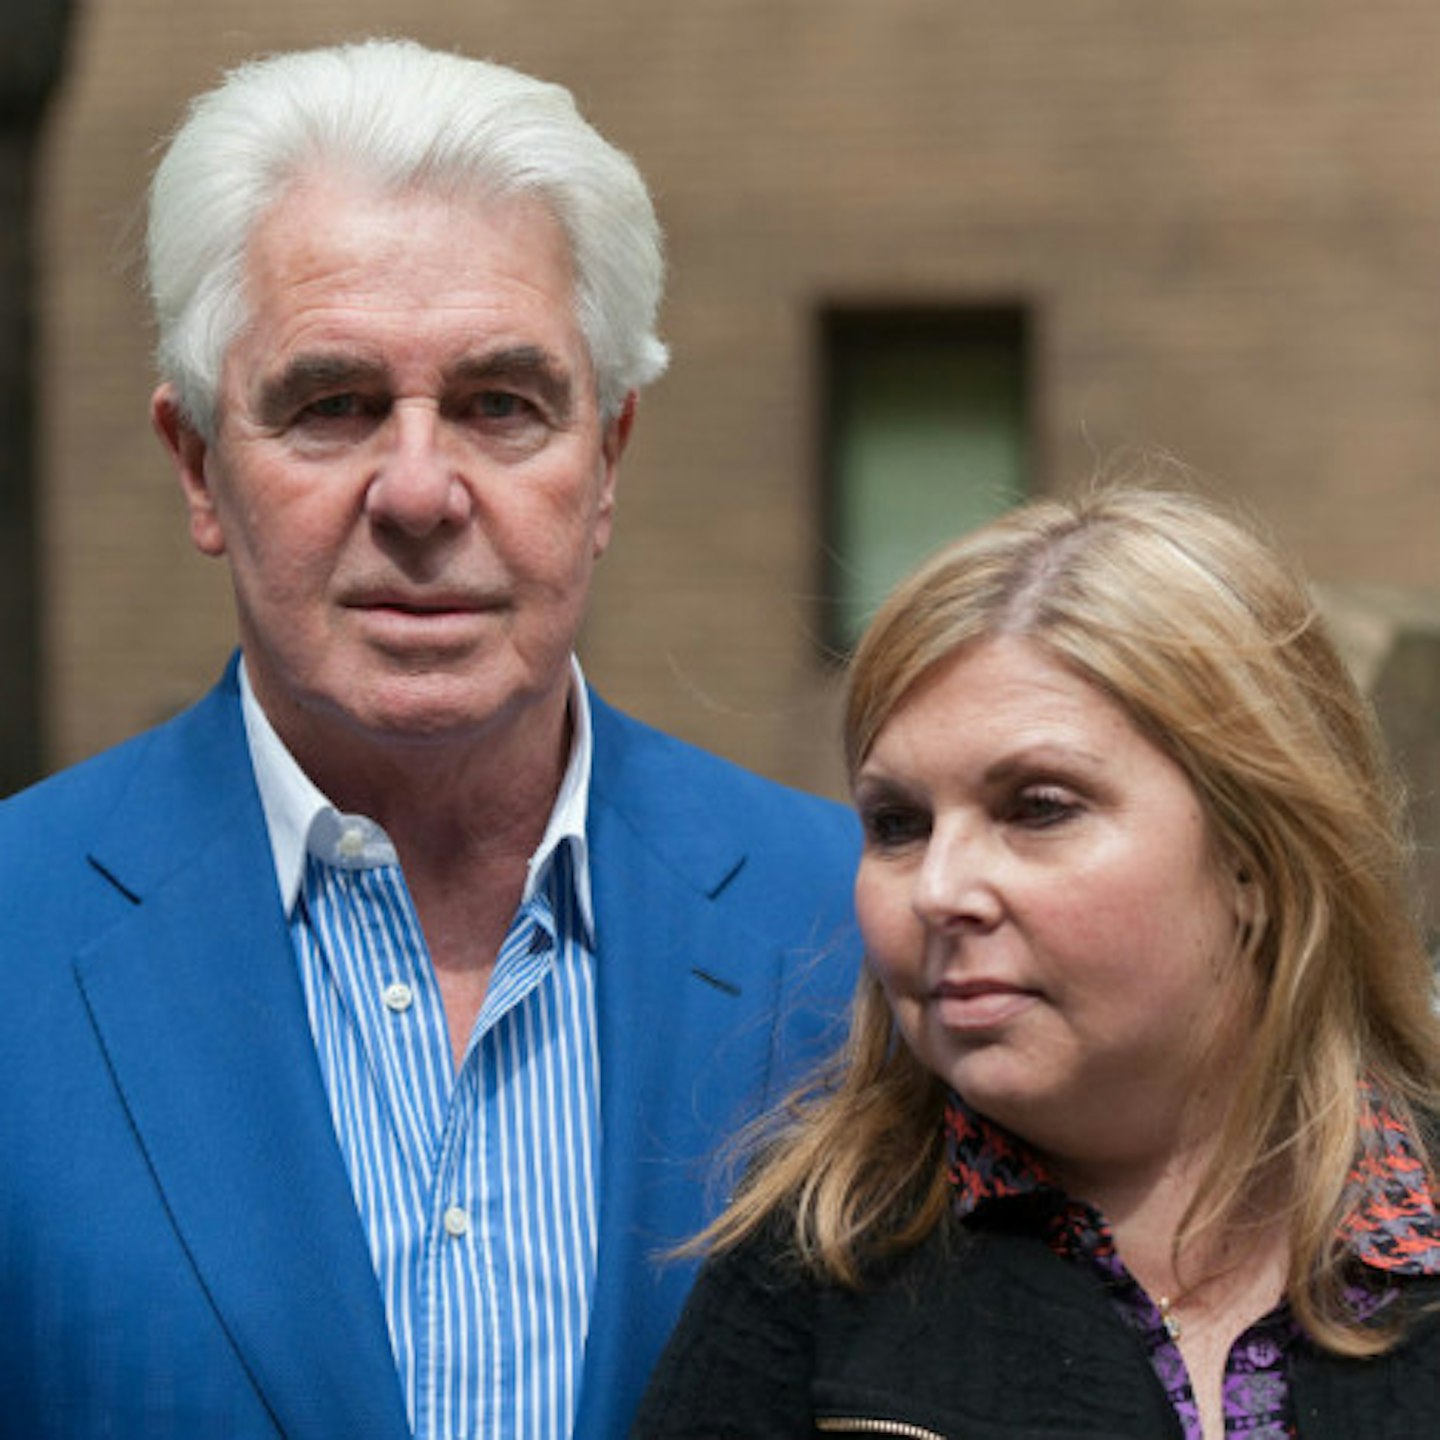 Max's daughter, Louise, was by her father's side throughout the case.